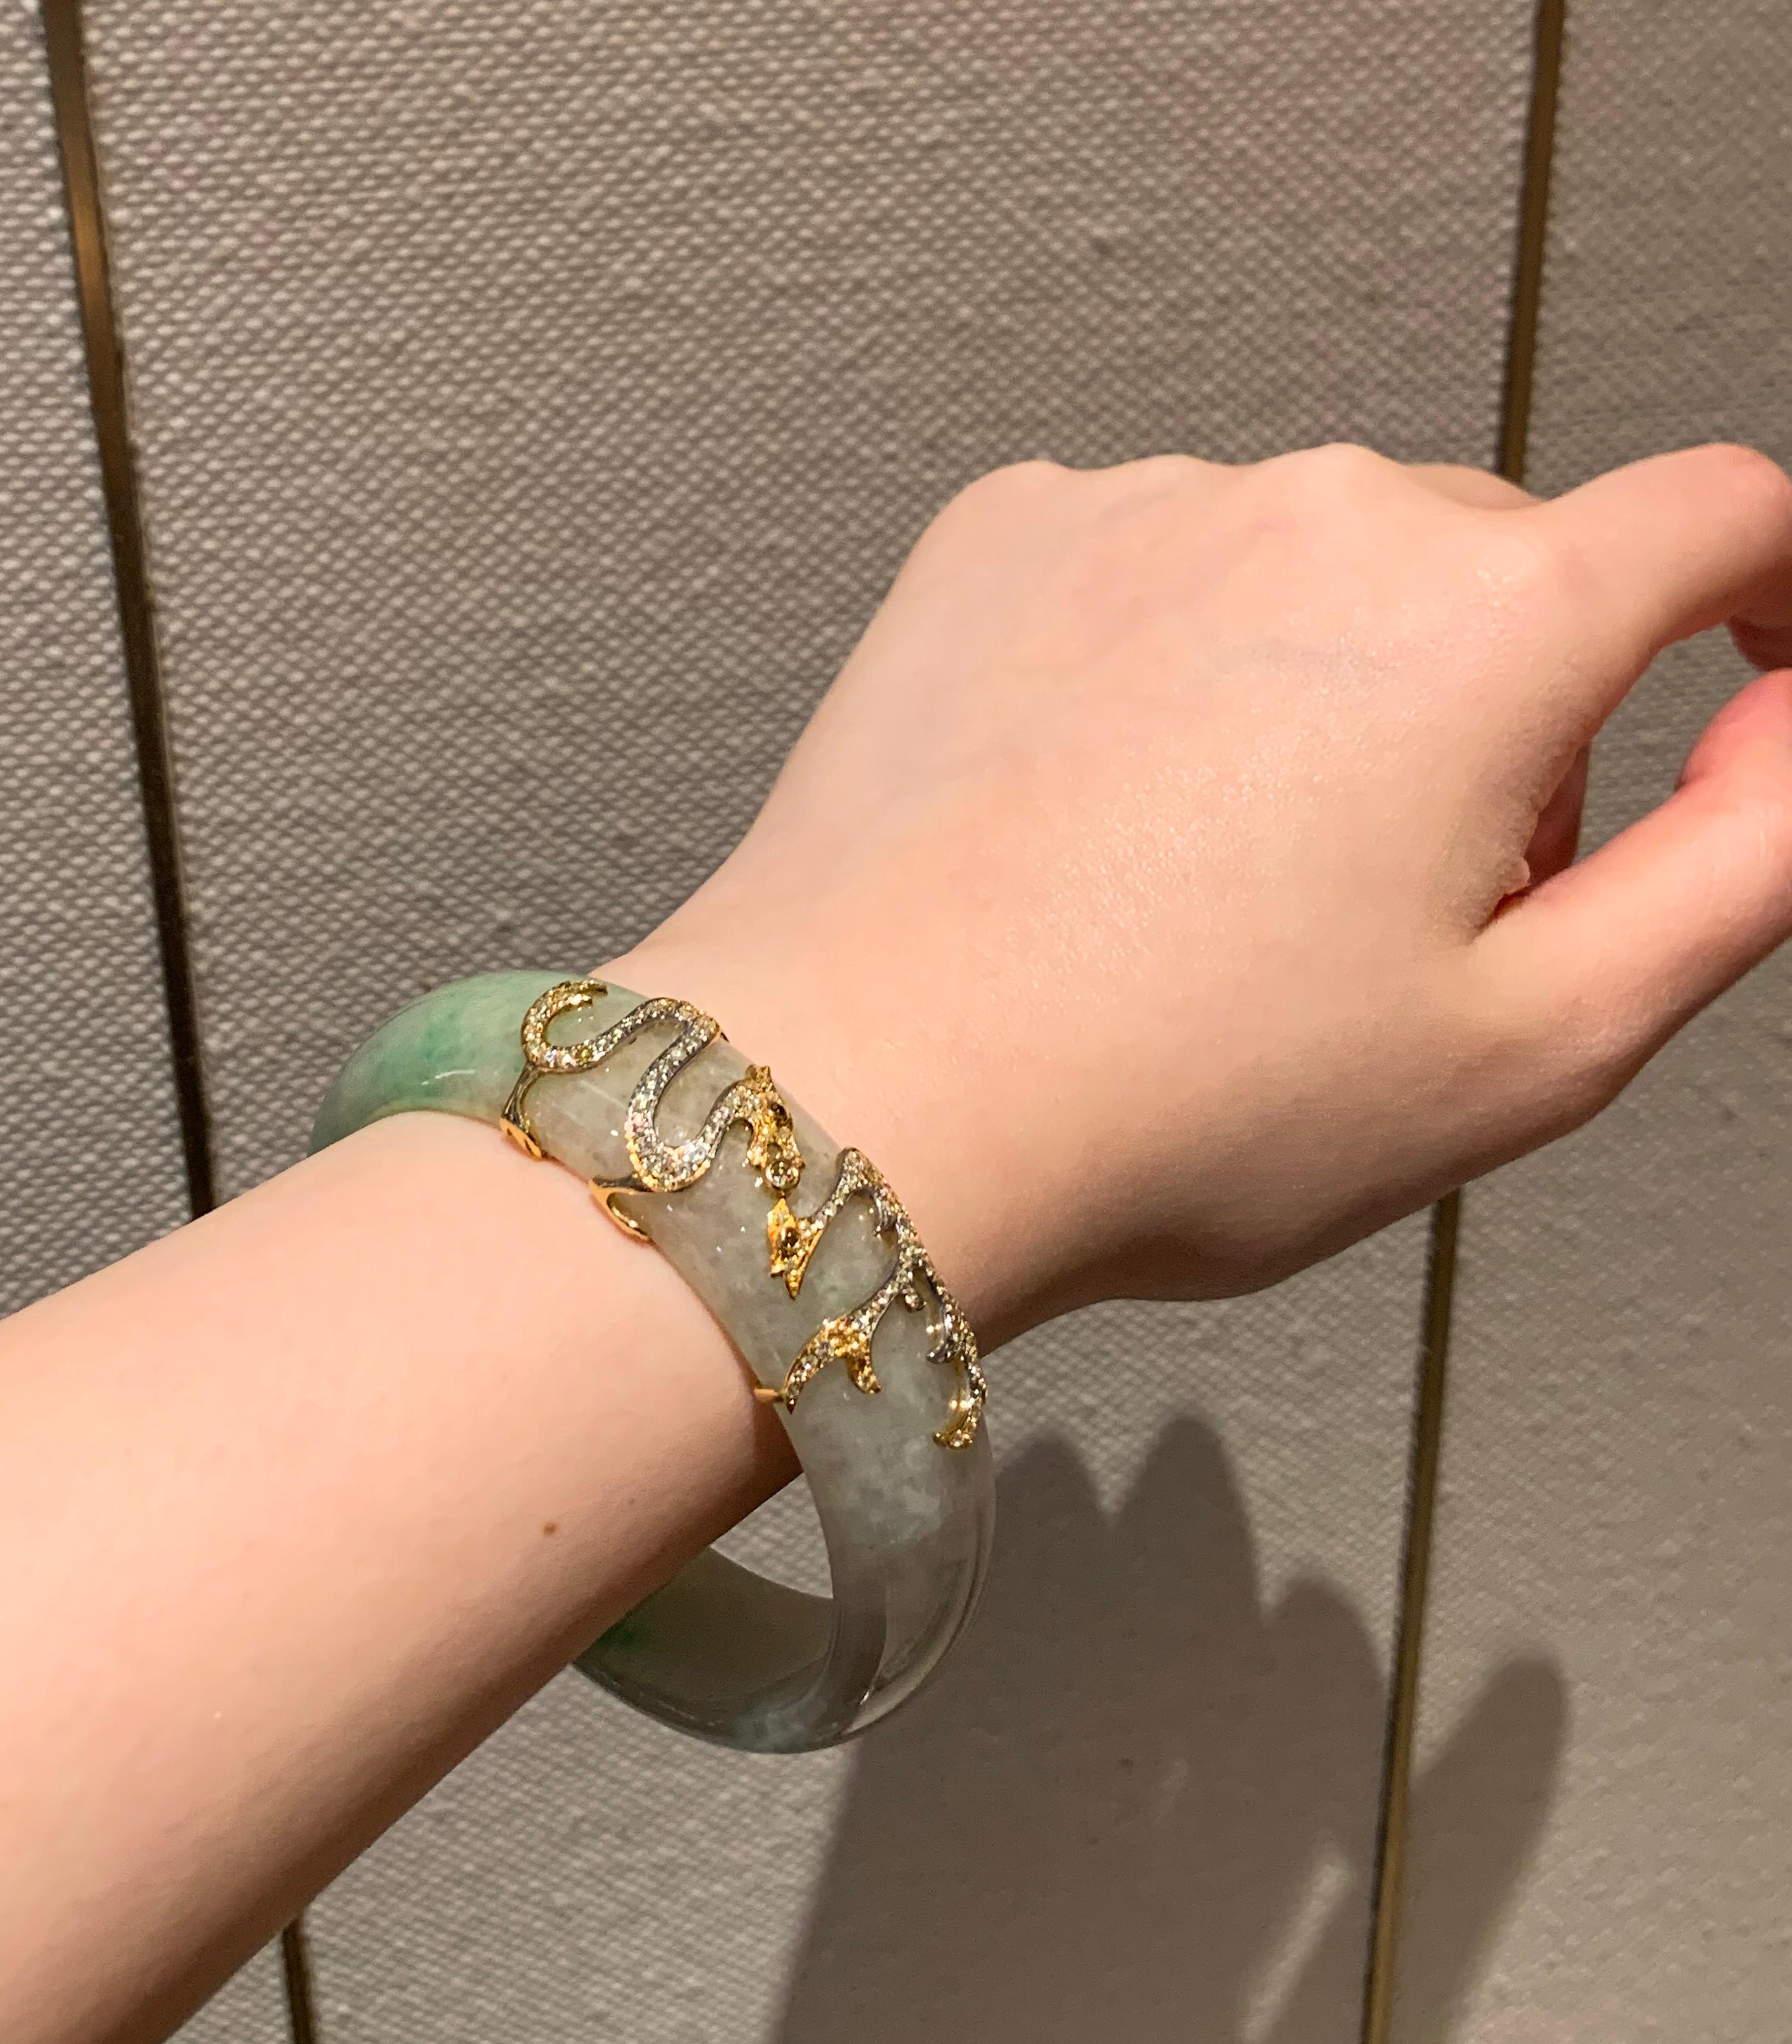 The House of Dilys’ presents the jade bangle with a modern twist. Bringing out the colours of this HKJSL certified 311.16-carat natural jade bangle is the 18 karat gold dragon guard, set with 100 fancy color diamonds, totaling .96 carat. This